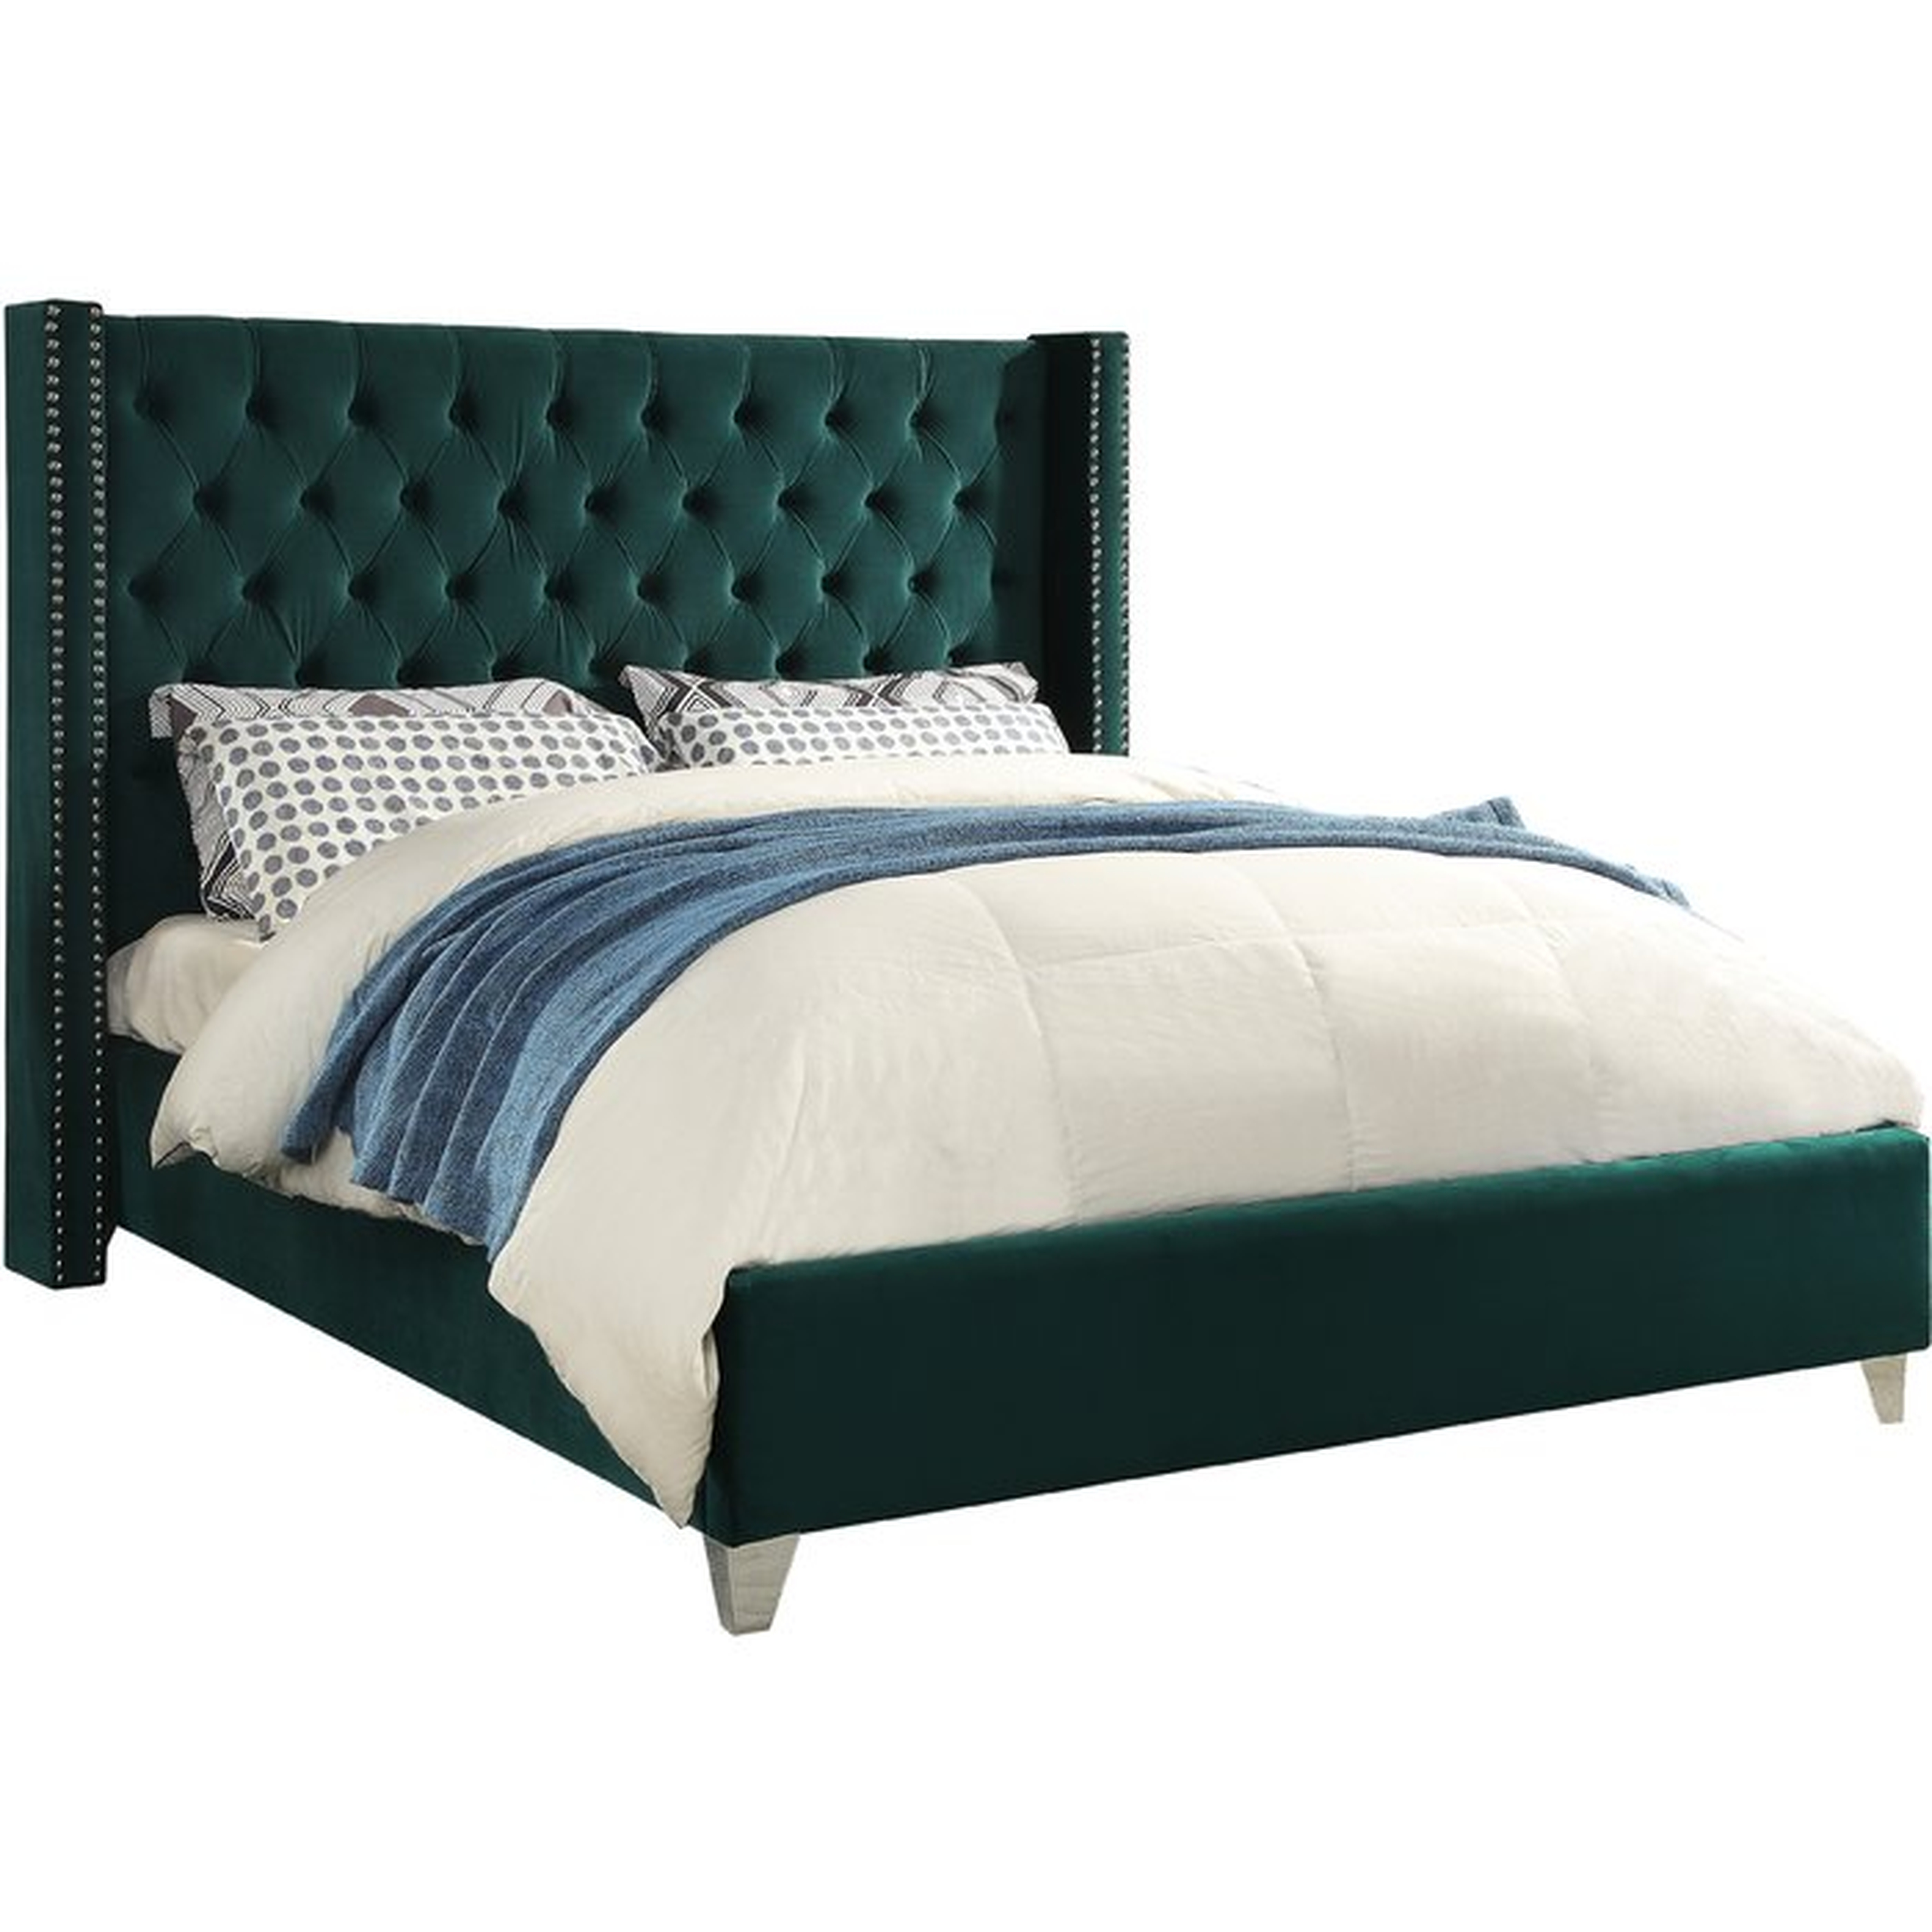 Mounts Upholstered Platform Bed See More by House of Hampton, Green, King - Wayfair